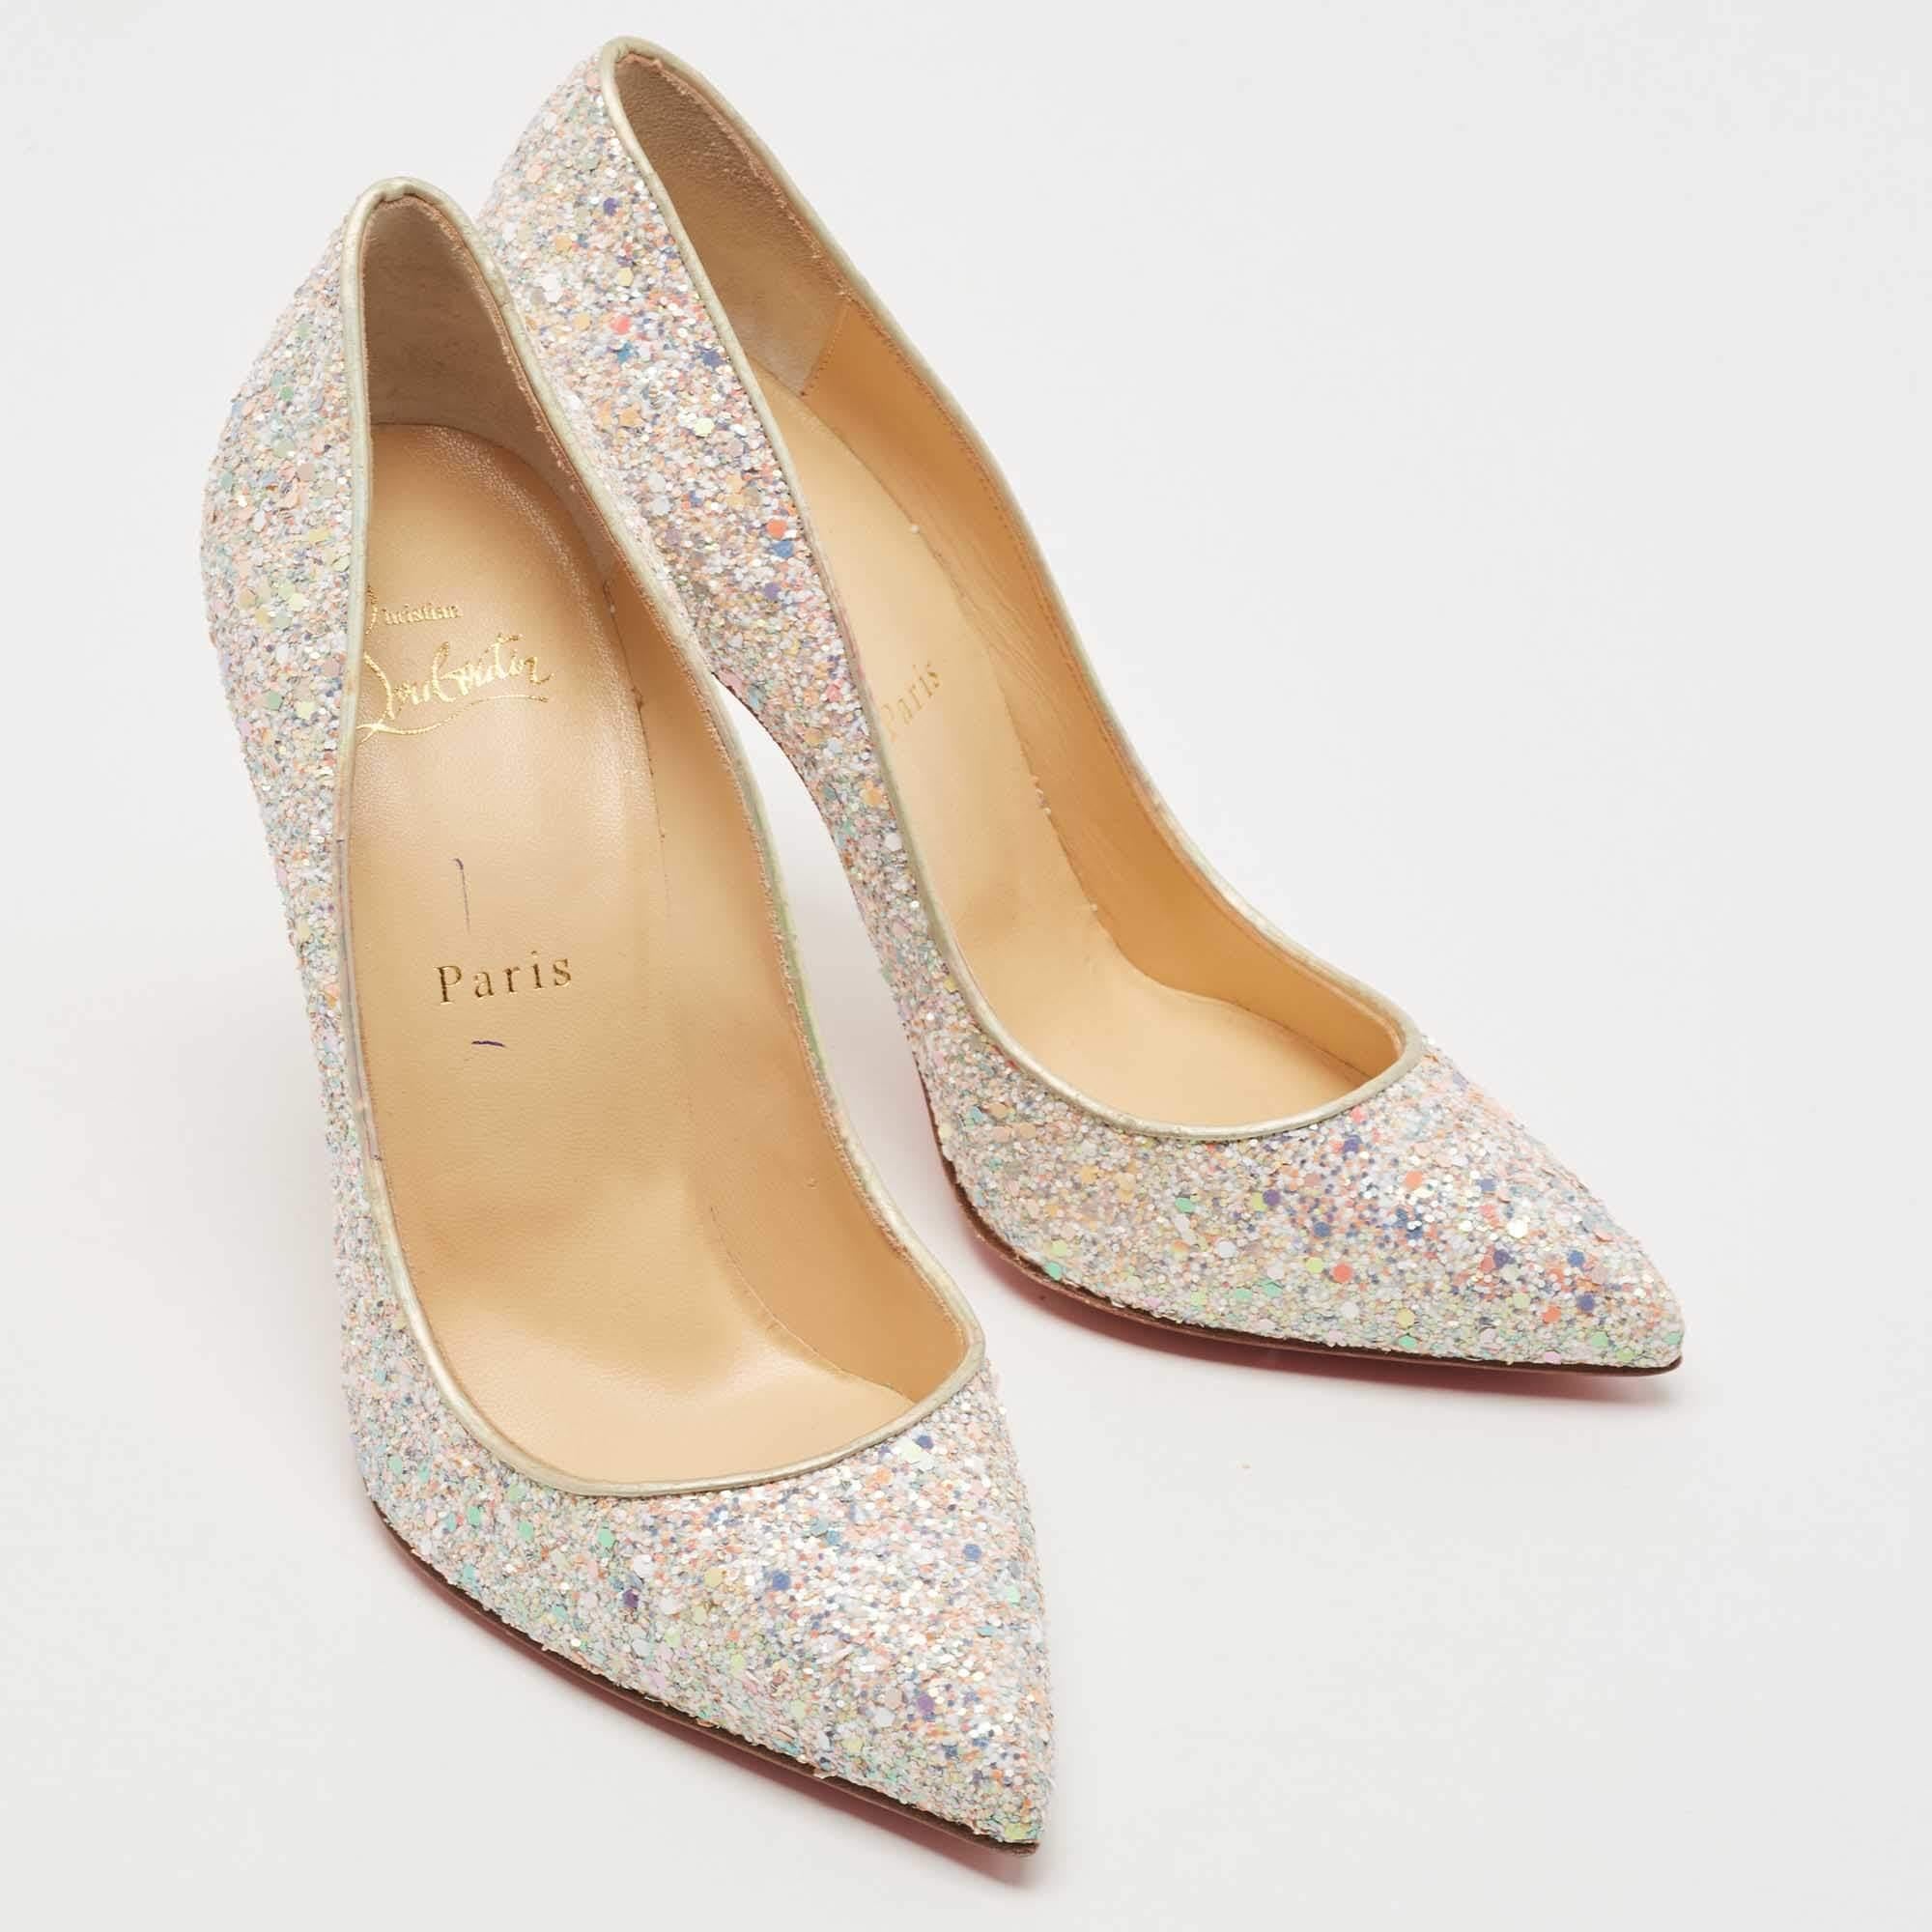 Women's Chrstian Louboutin Multicolor Glitter Pigalle Follies Pointed Toe Pumps Size 38.